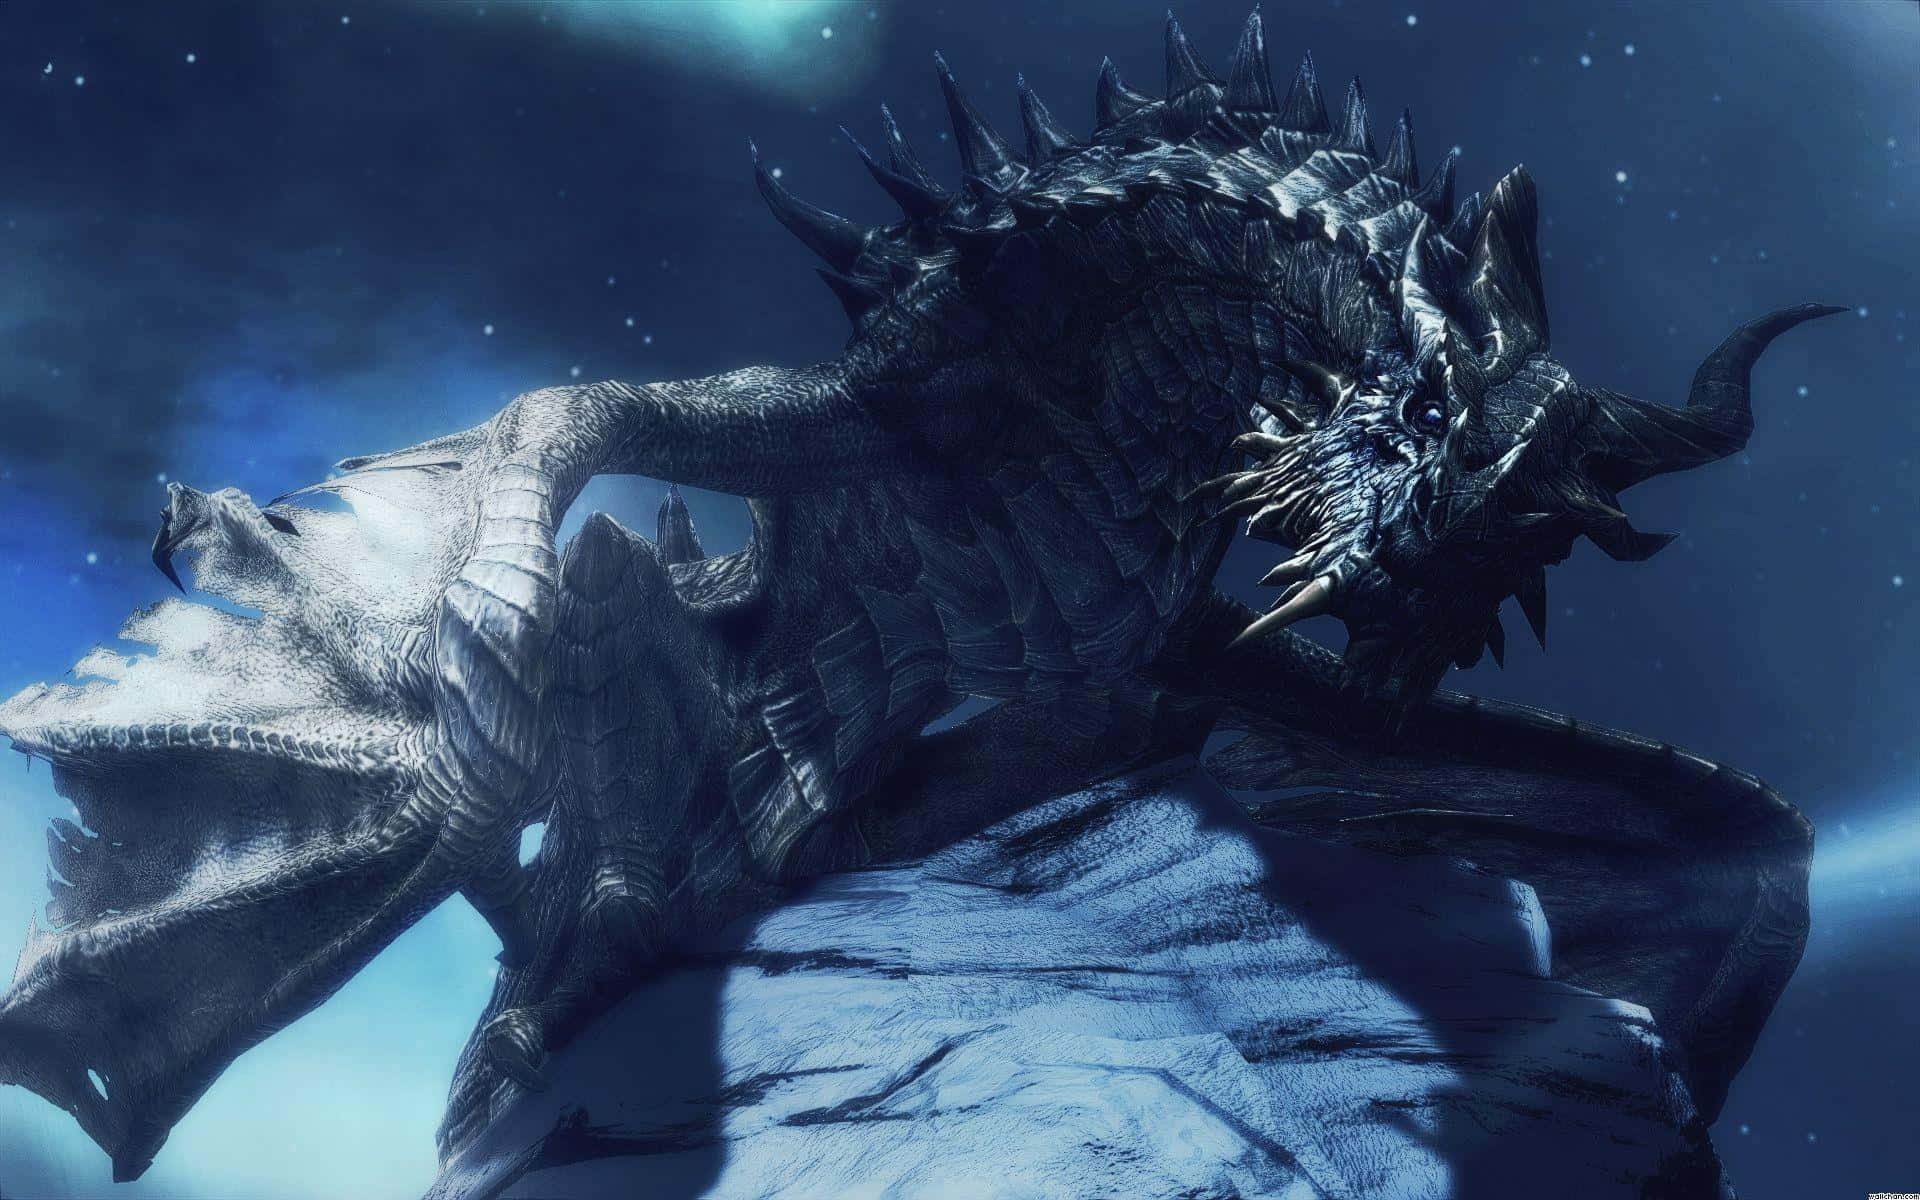 Paarthurnax atop the Throat of the World in Skyrim Wallpaper